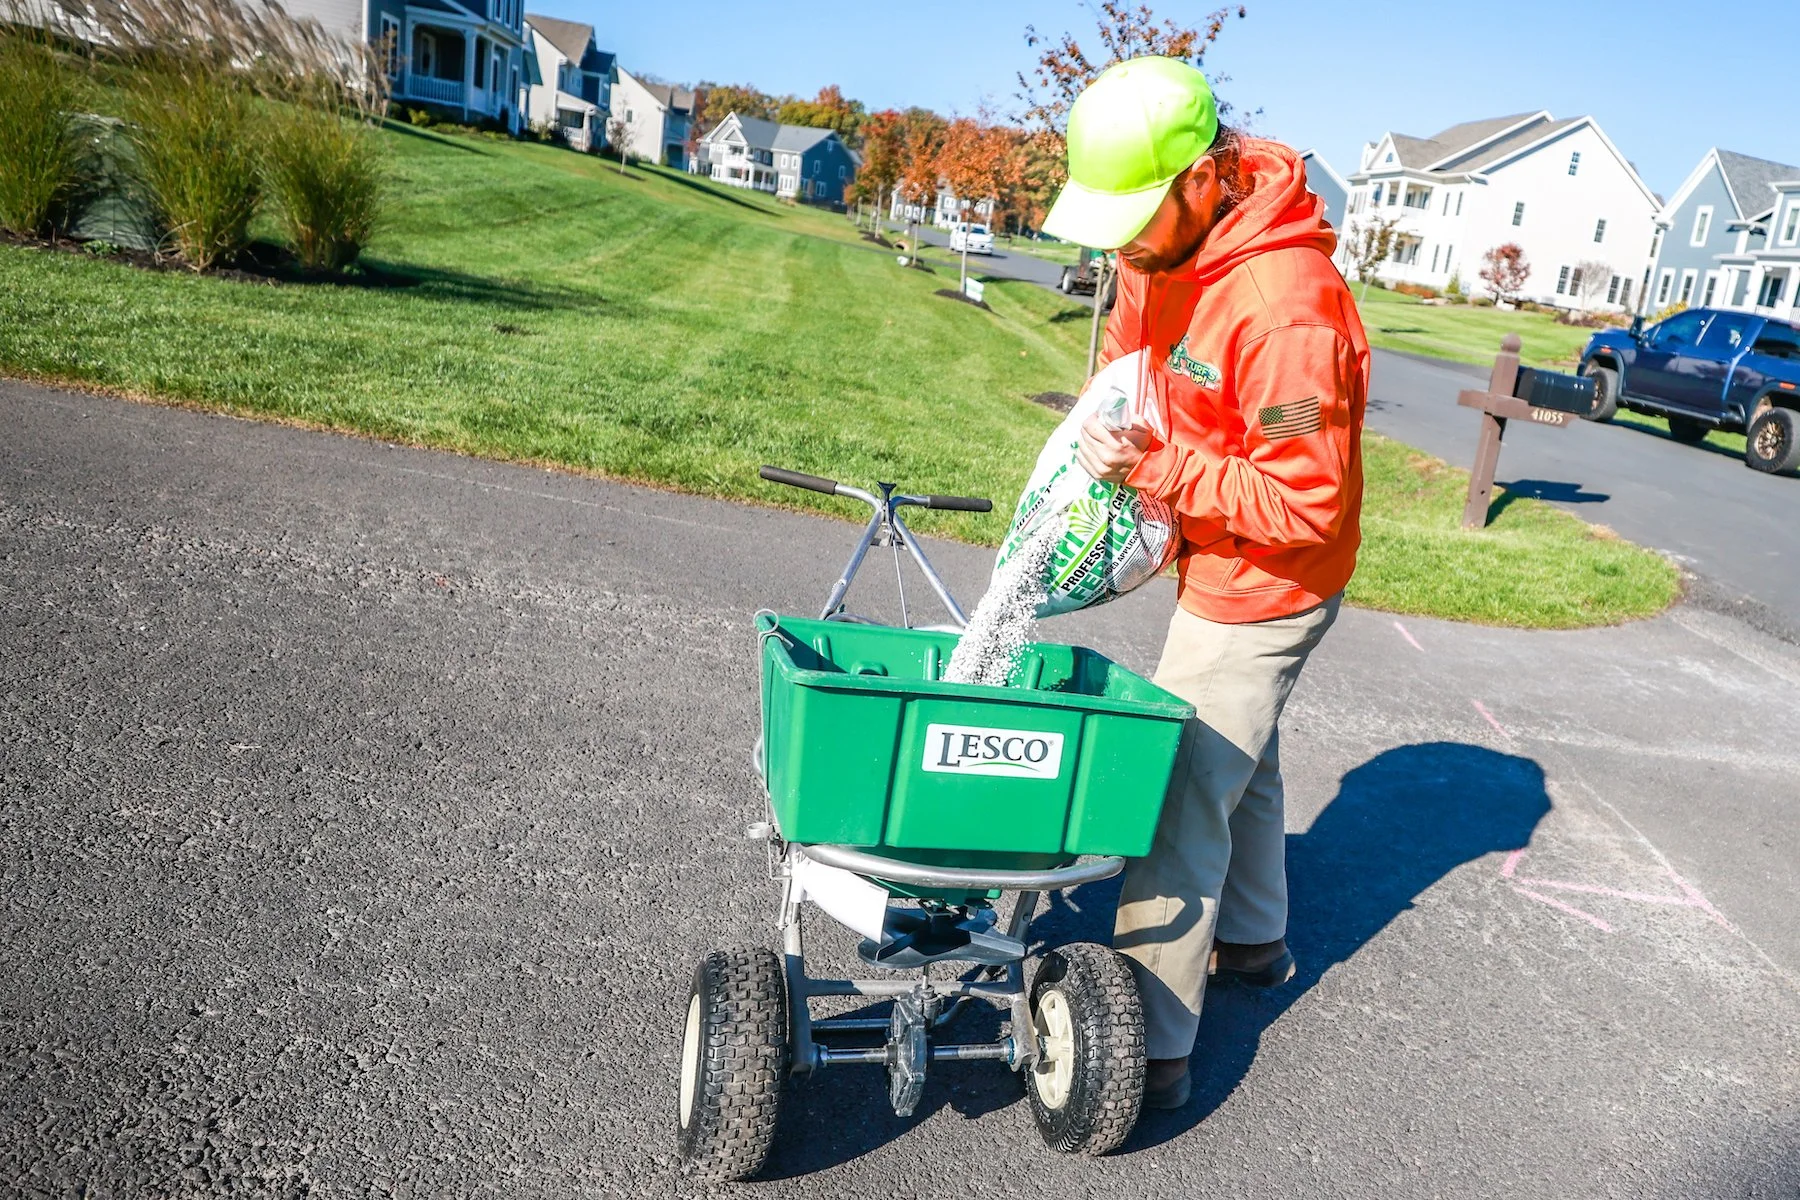 7 Tips for Choosing a Lawn Care Service in Northern Virginia